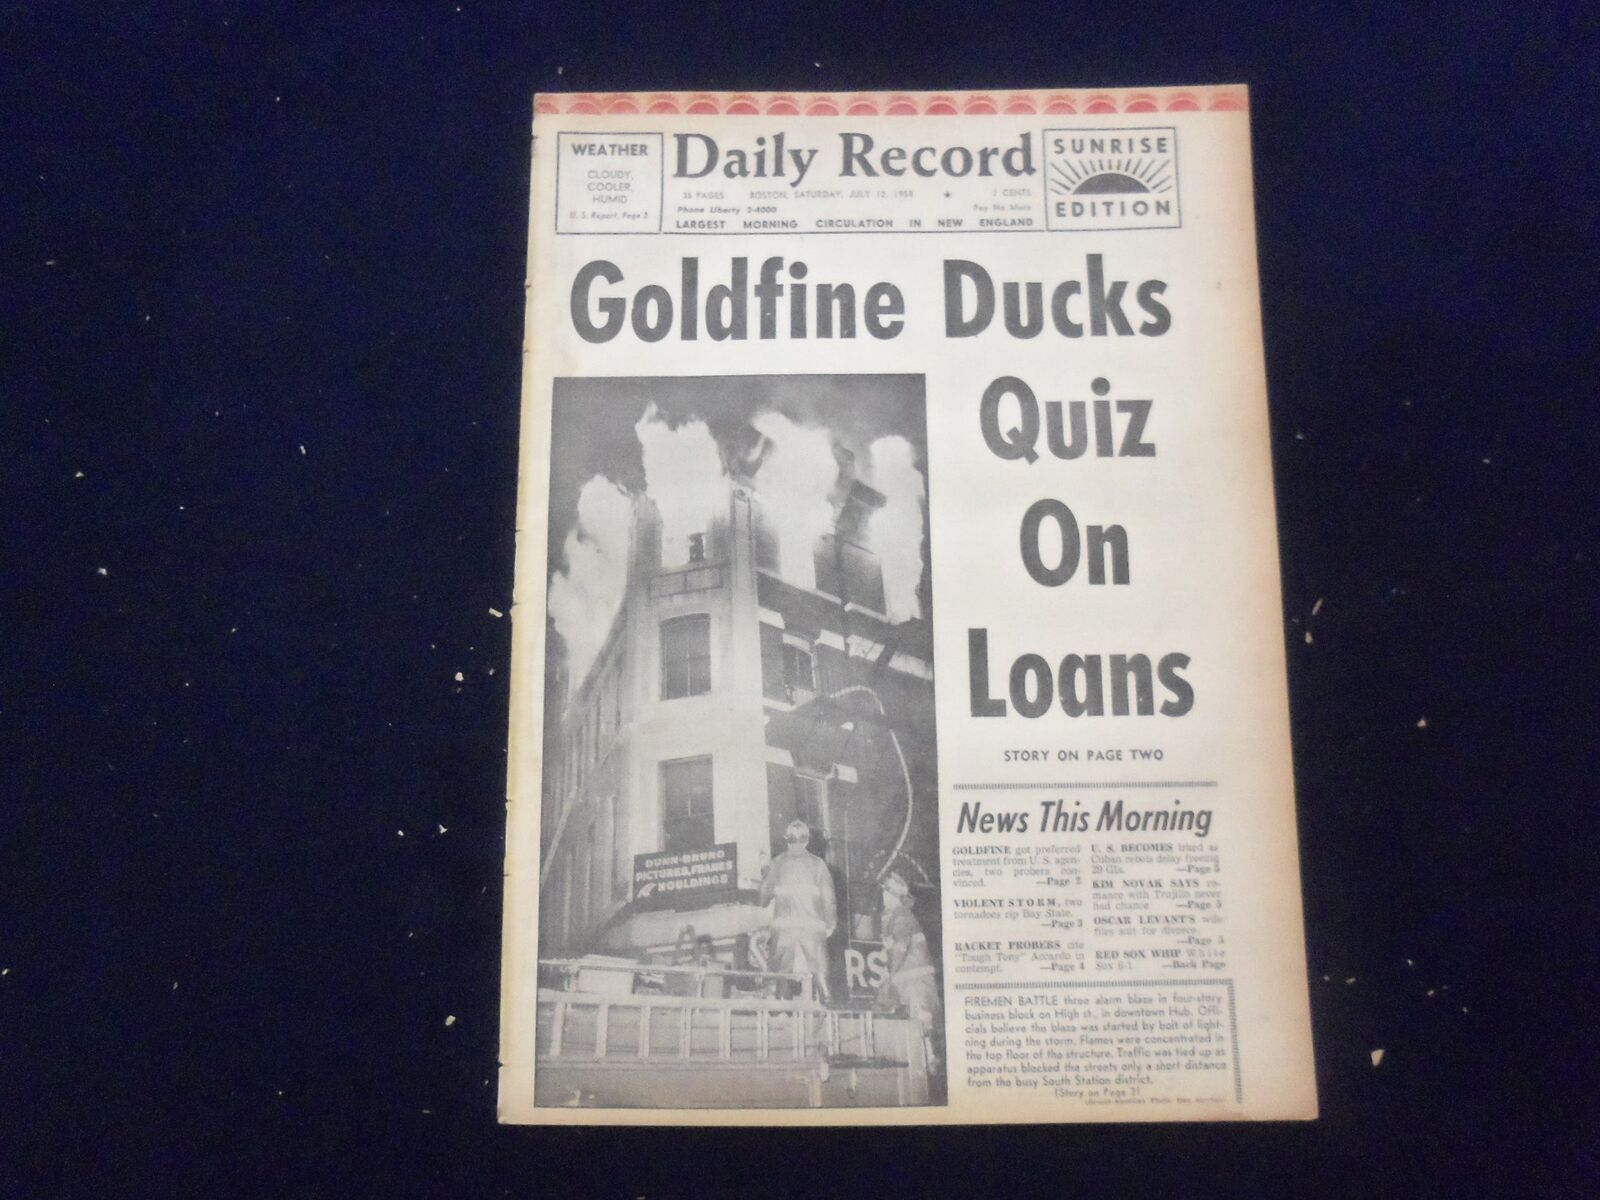 1958 JULY 12 BOSTON DAILY RECORD NEWSPAPER-GOLDFINE DUCKS QUIZ ON LOANS -NP 6354